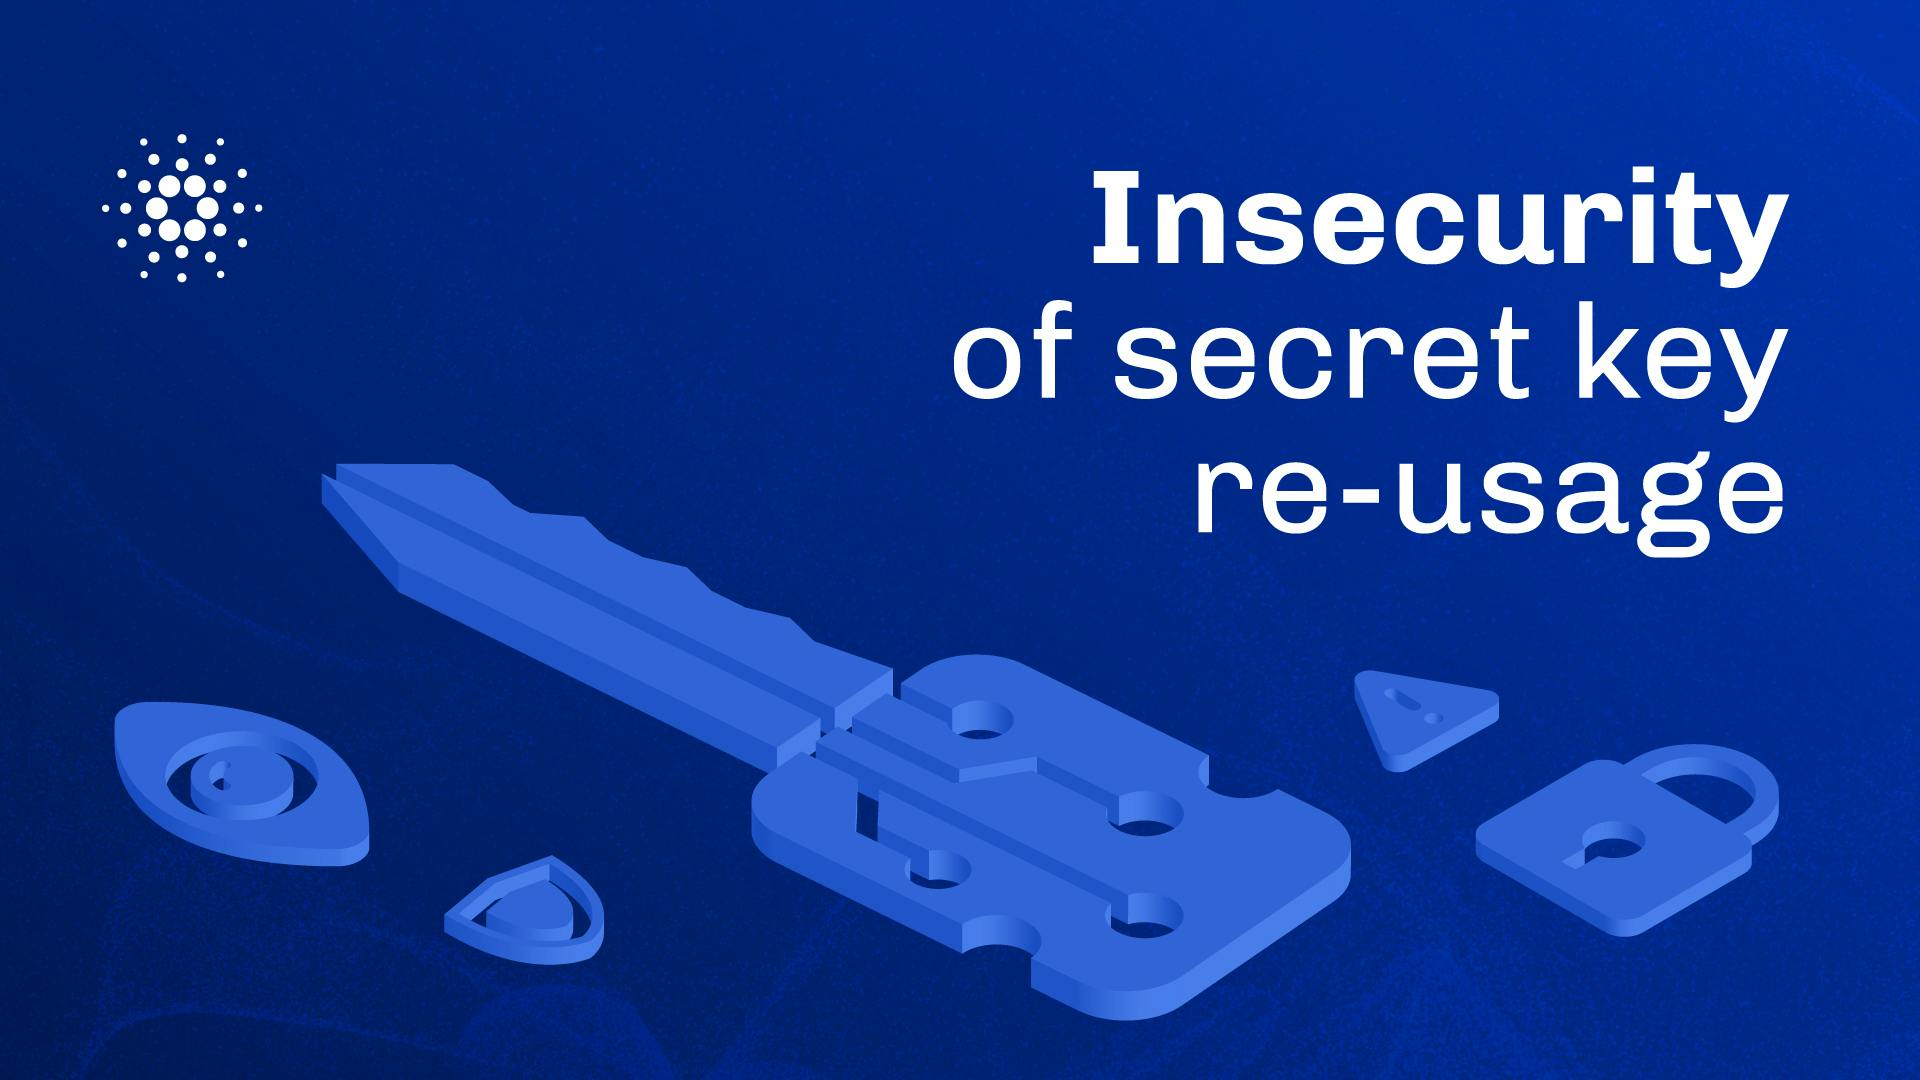 Insecurity of secret key re-usage